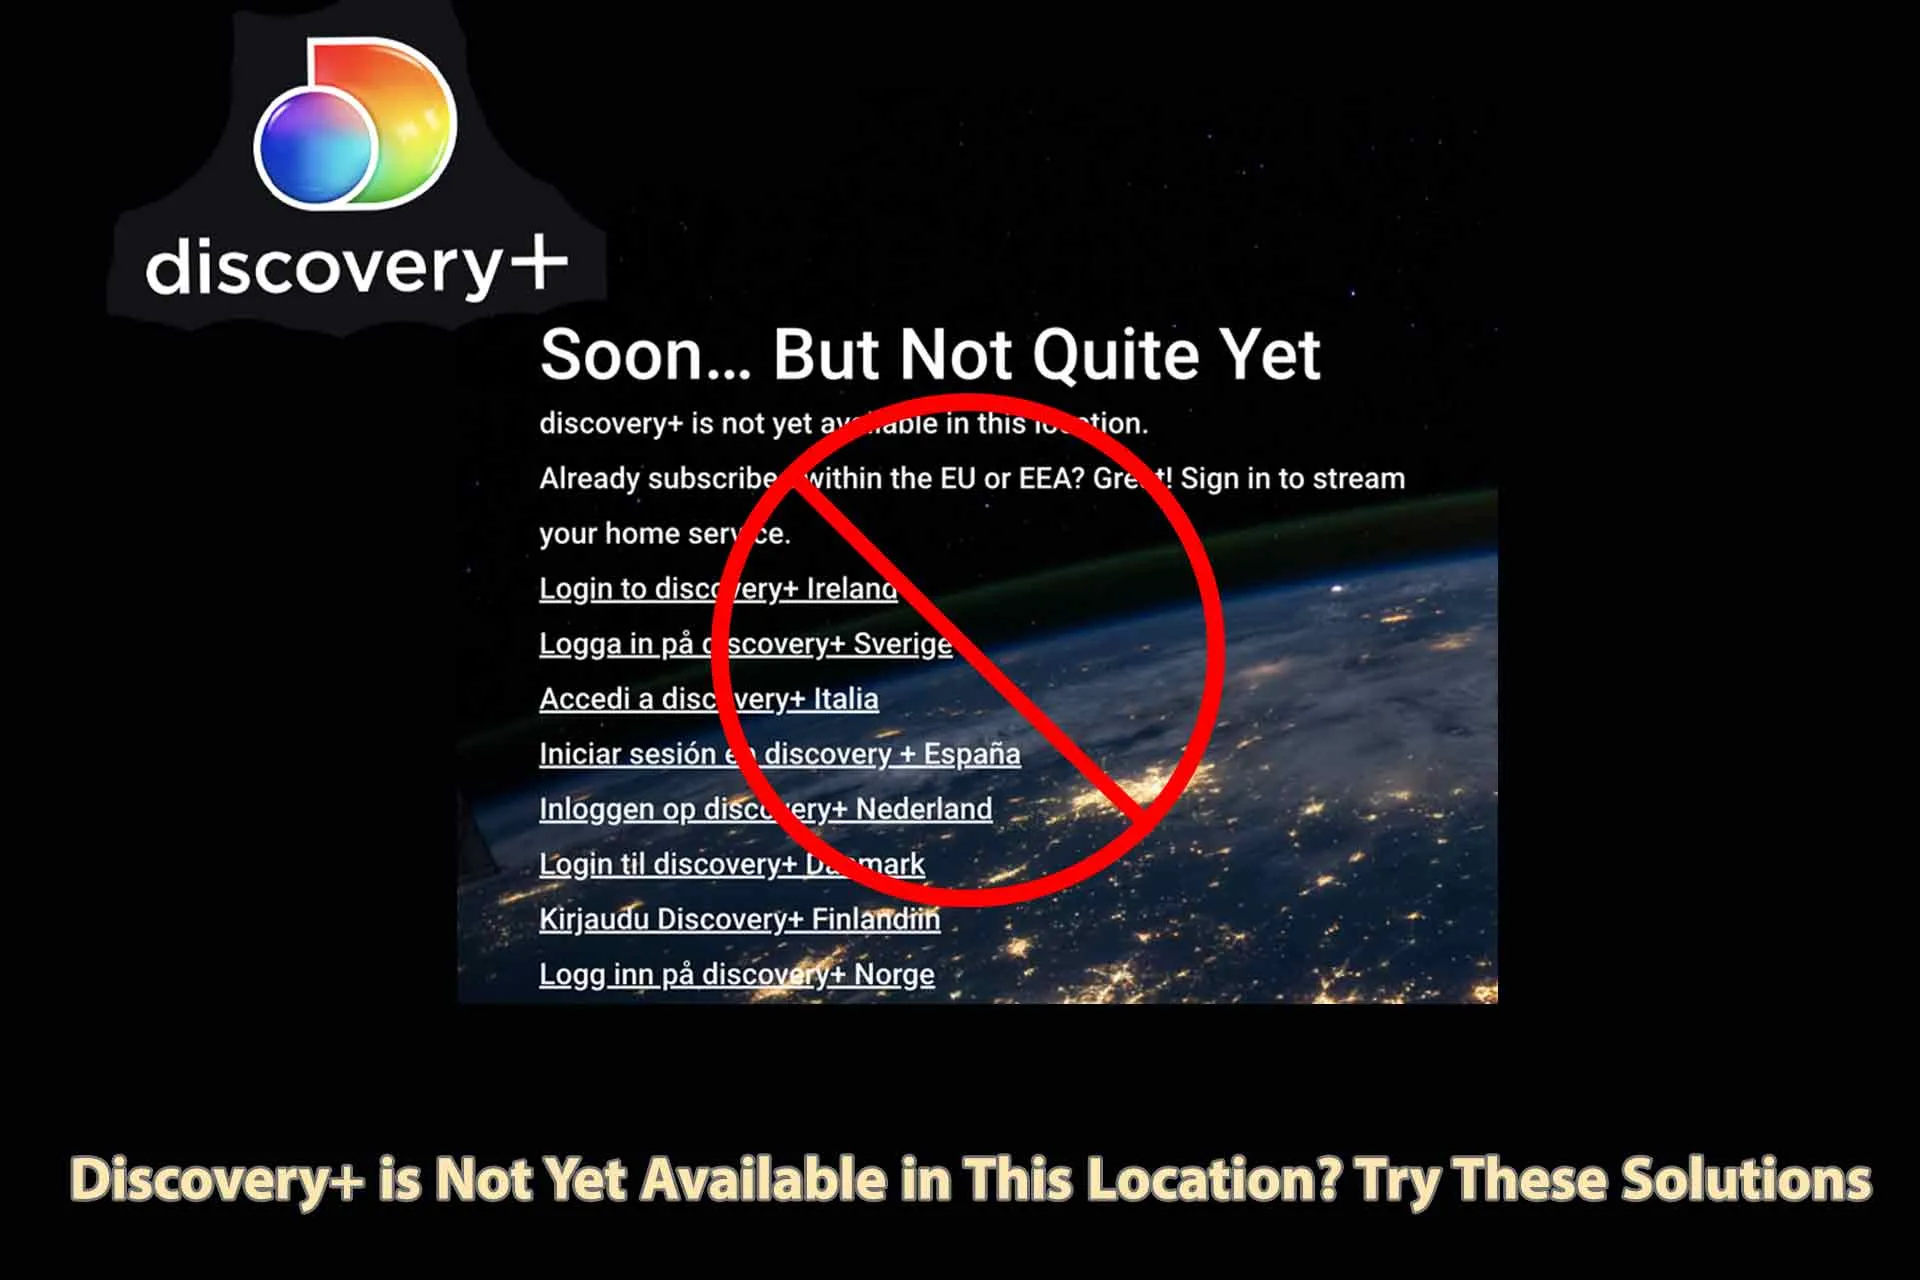 Discovery+ is Not Yet Available in This Location